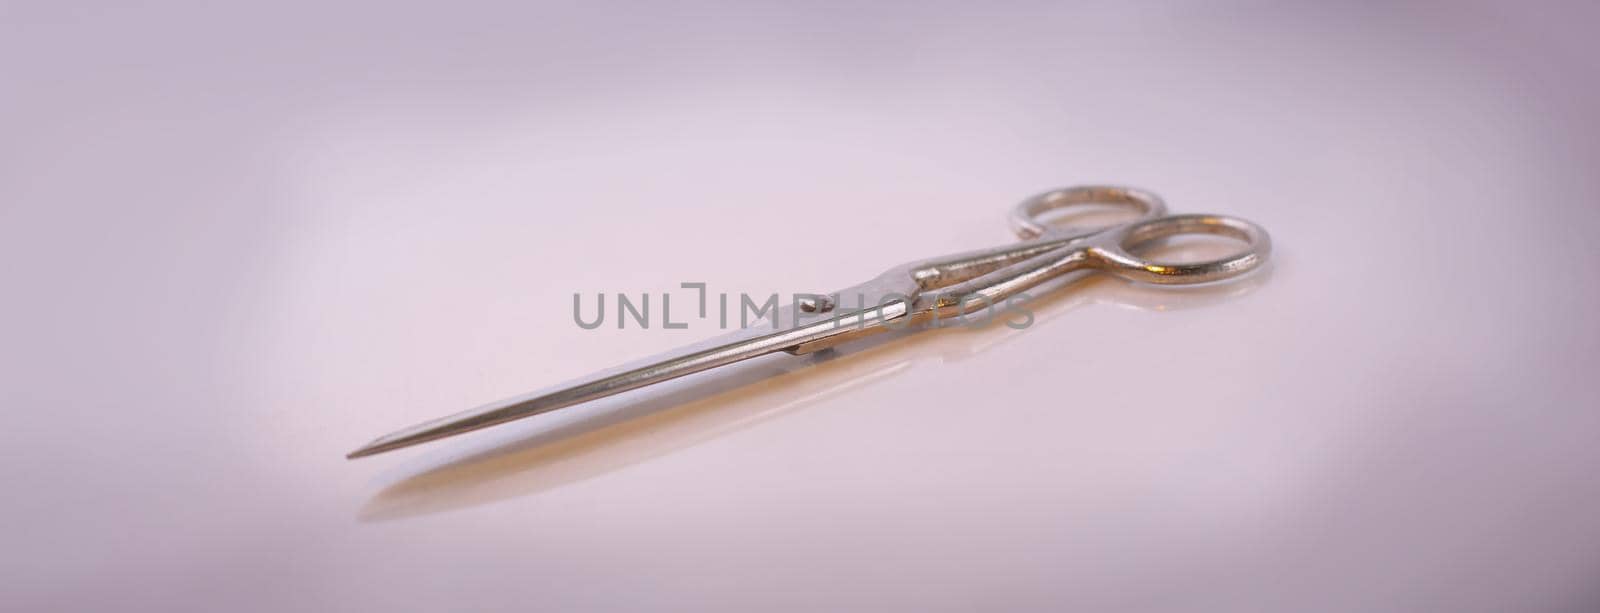 scissors made of metal.isolated on a light background. by SmartPhotoLab